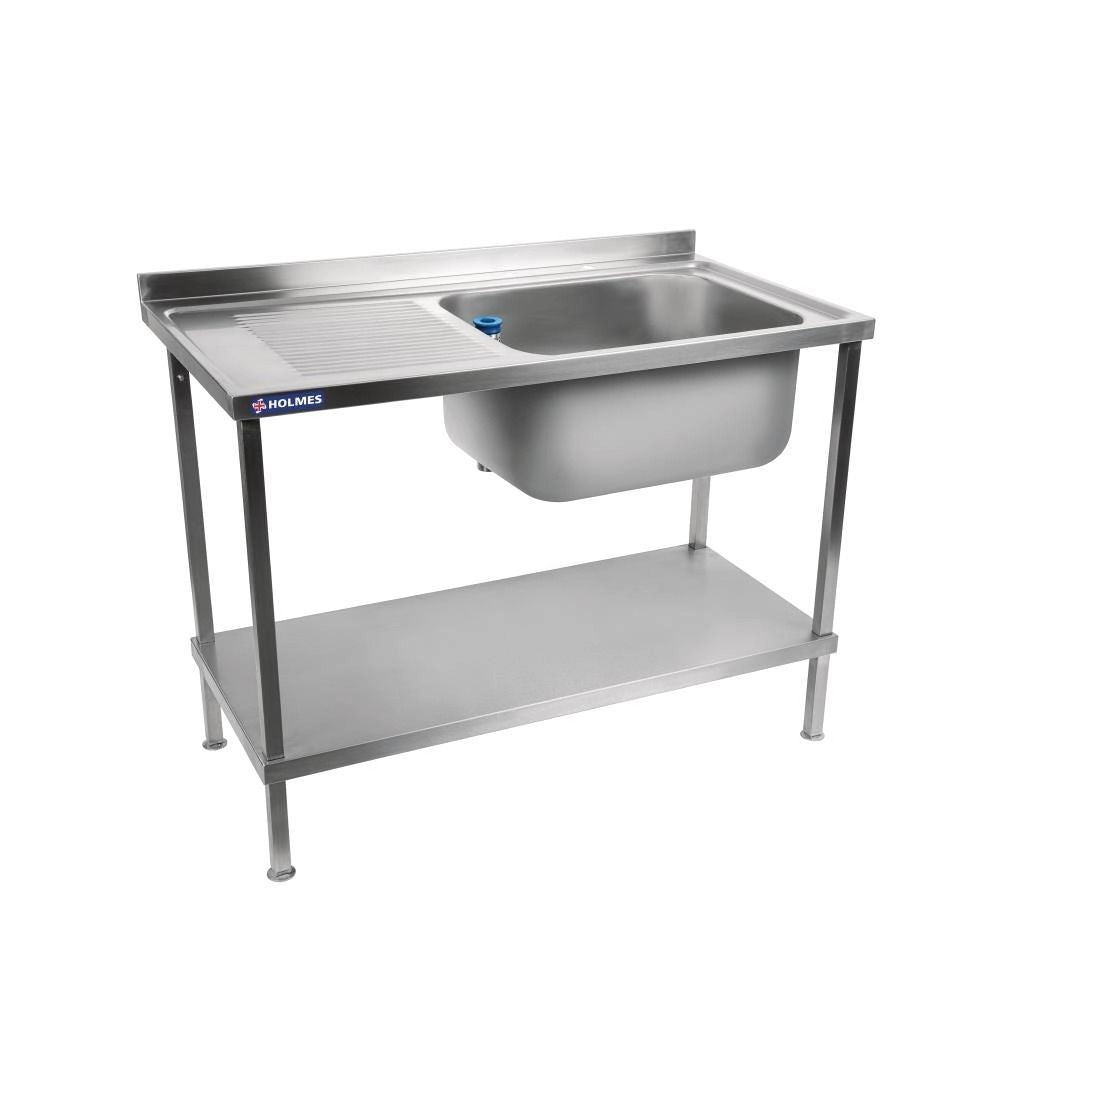 Holmes Self Assembly Stainless Steel Sink Left Hand Drainer 1200mm - DR361